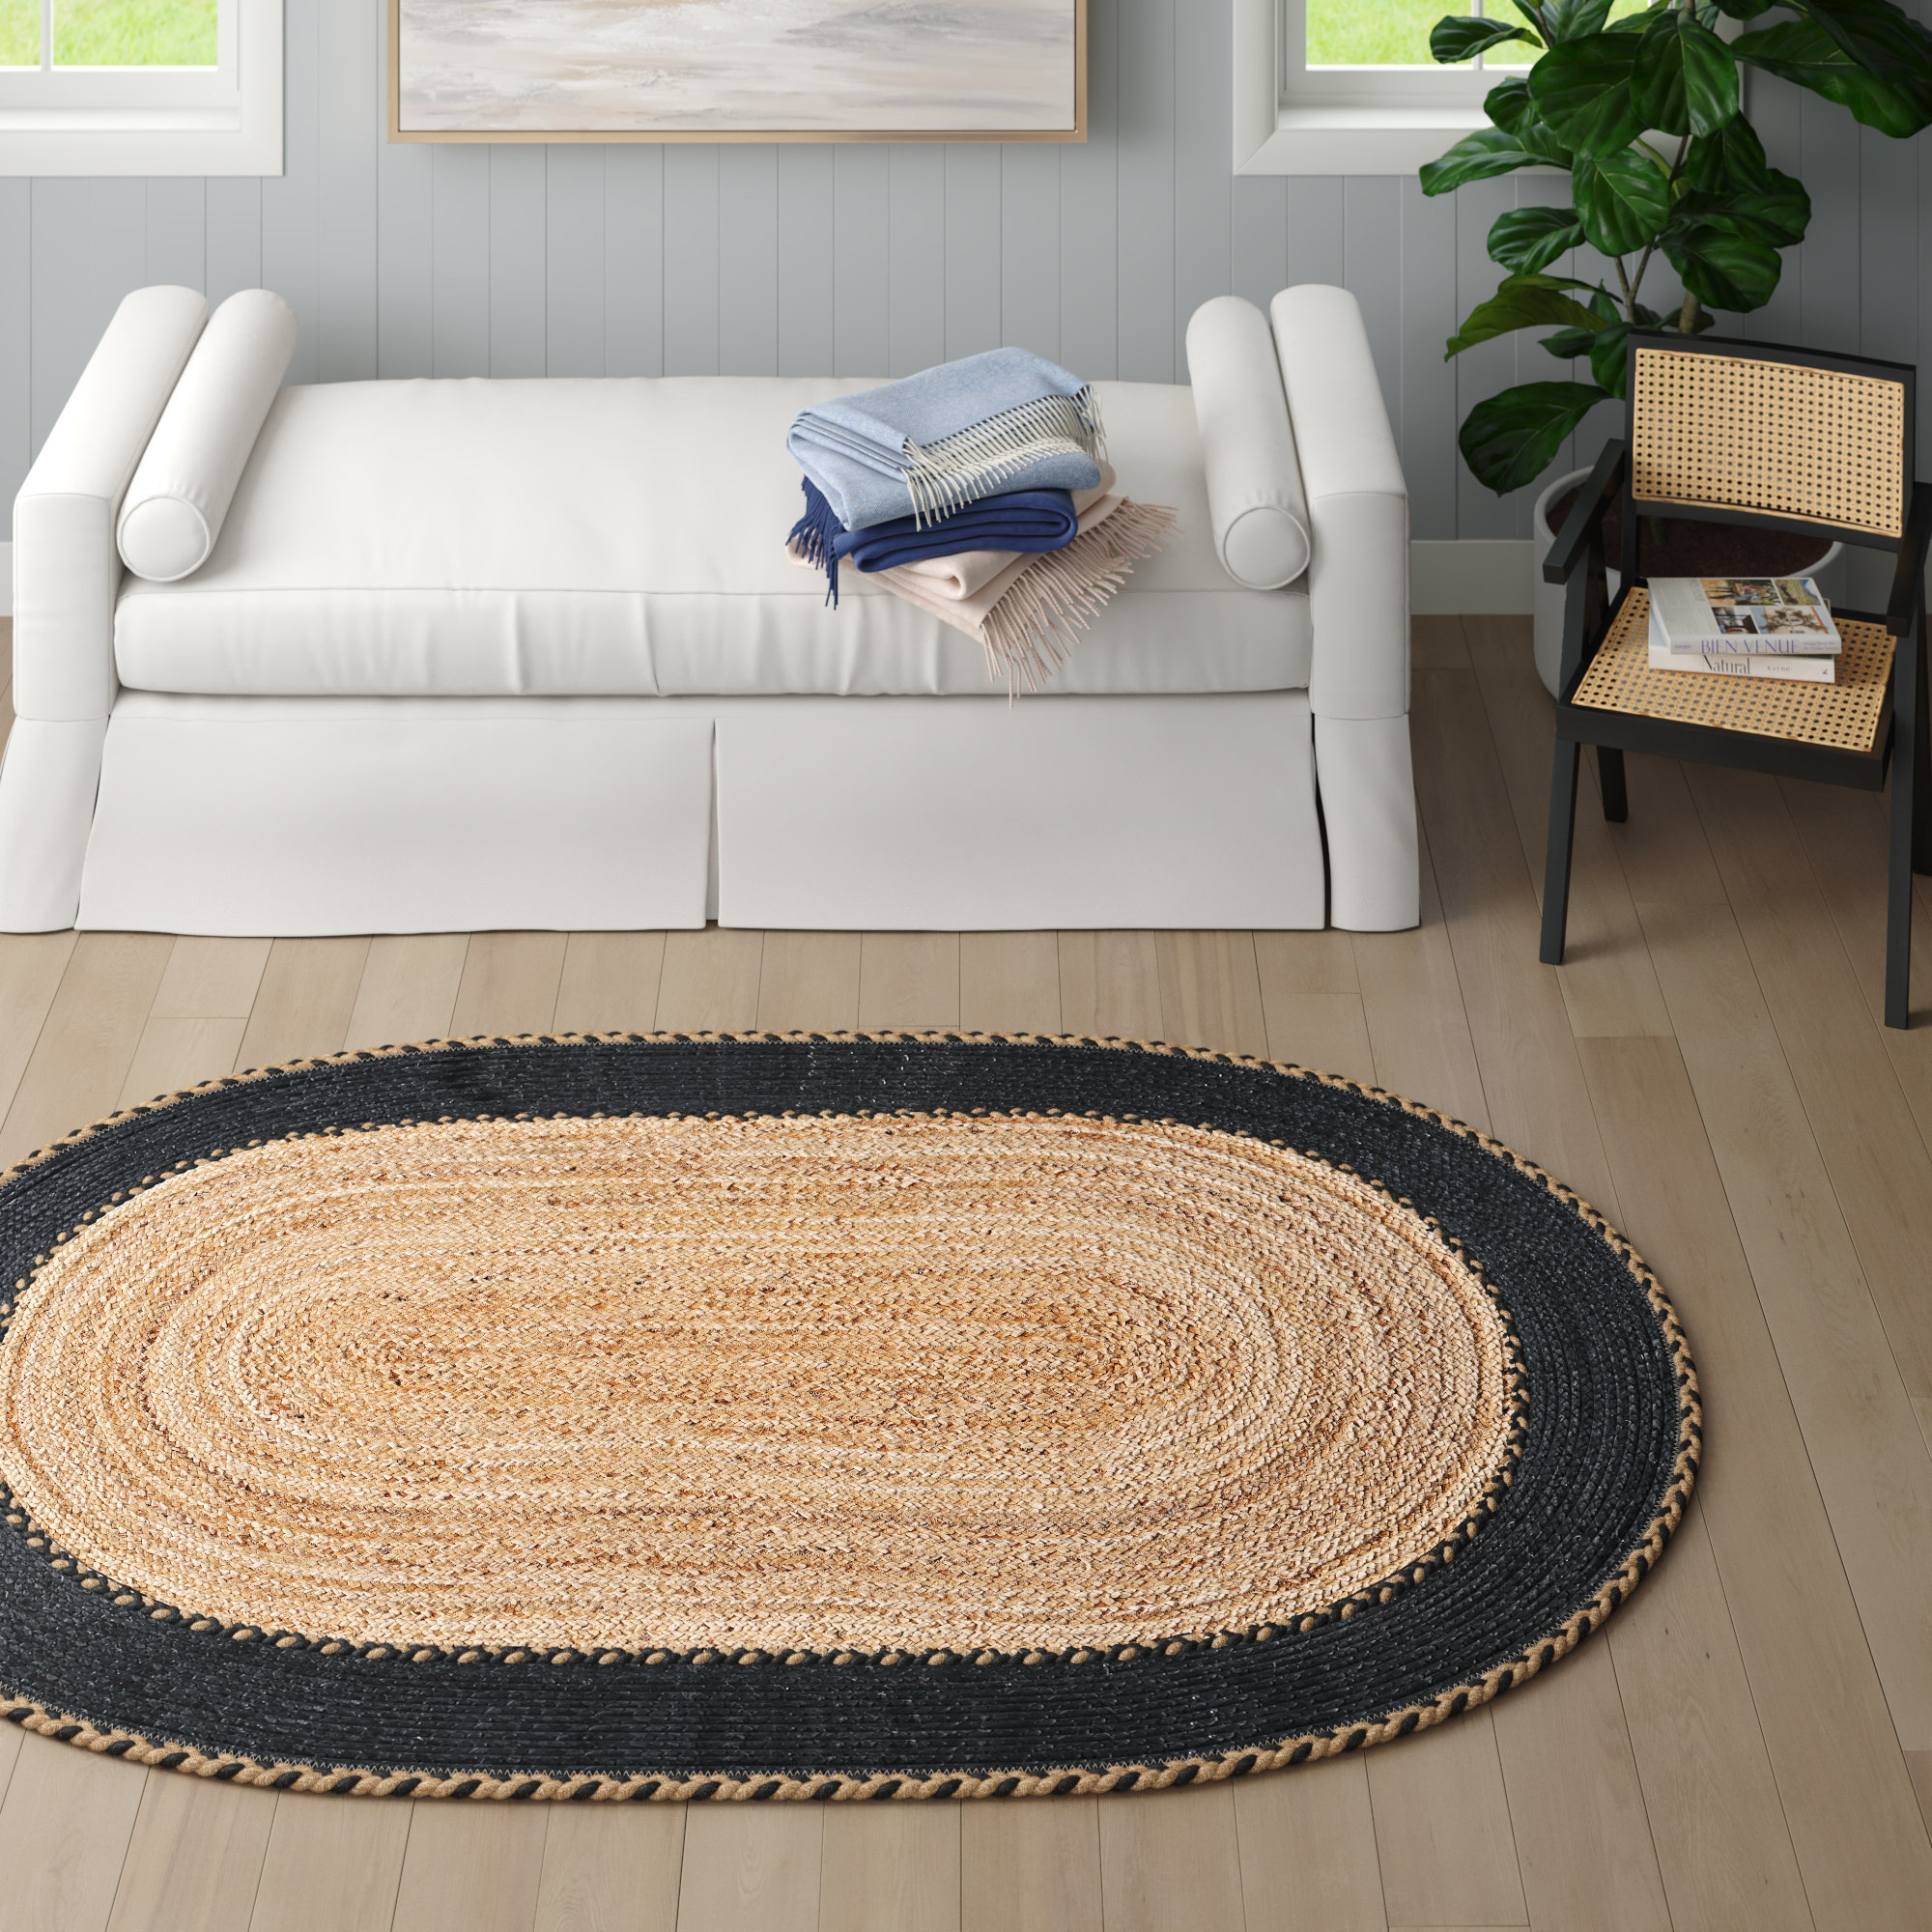 Hand-woven Natural Jute Oval Area Rugs for Kitchen 4 X 6, Braided RAG RUG 5  X 7 for Living Room, Hand-knotted Bedroom Area Rugs 3 X 5 